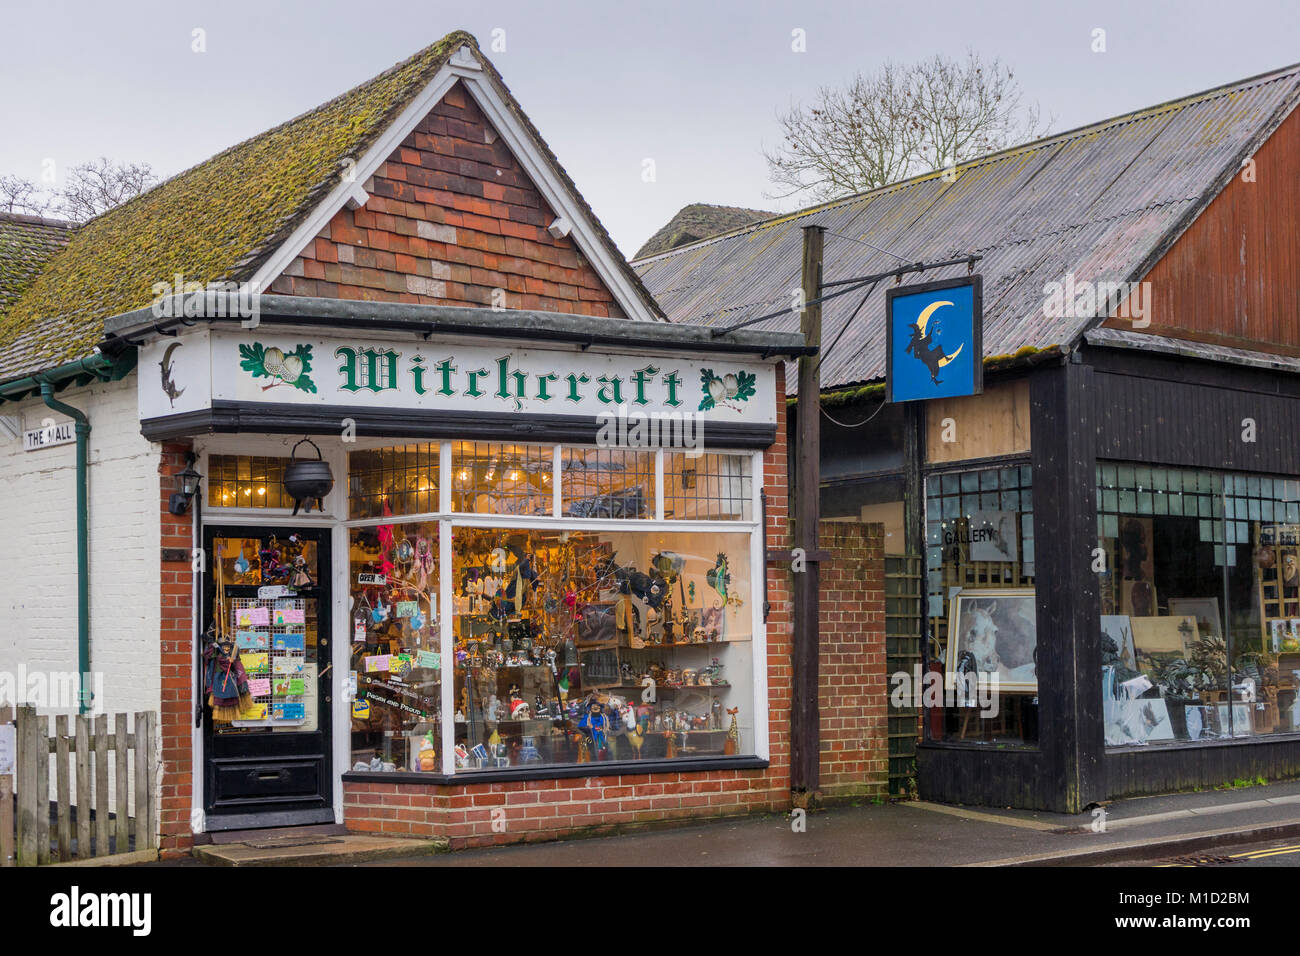 Shop facade of a shop called 'Witchcraft' in Burley, Hampshire, England, UK Stock Photo